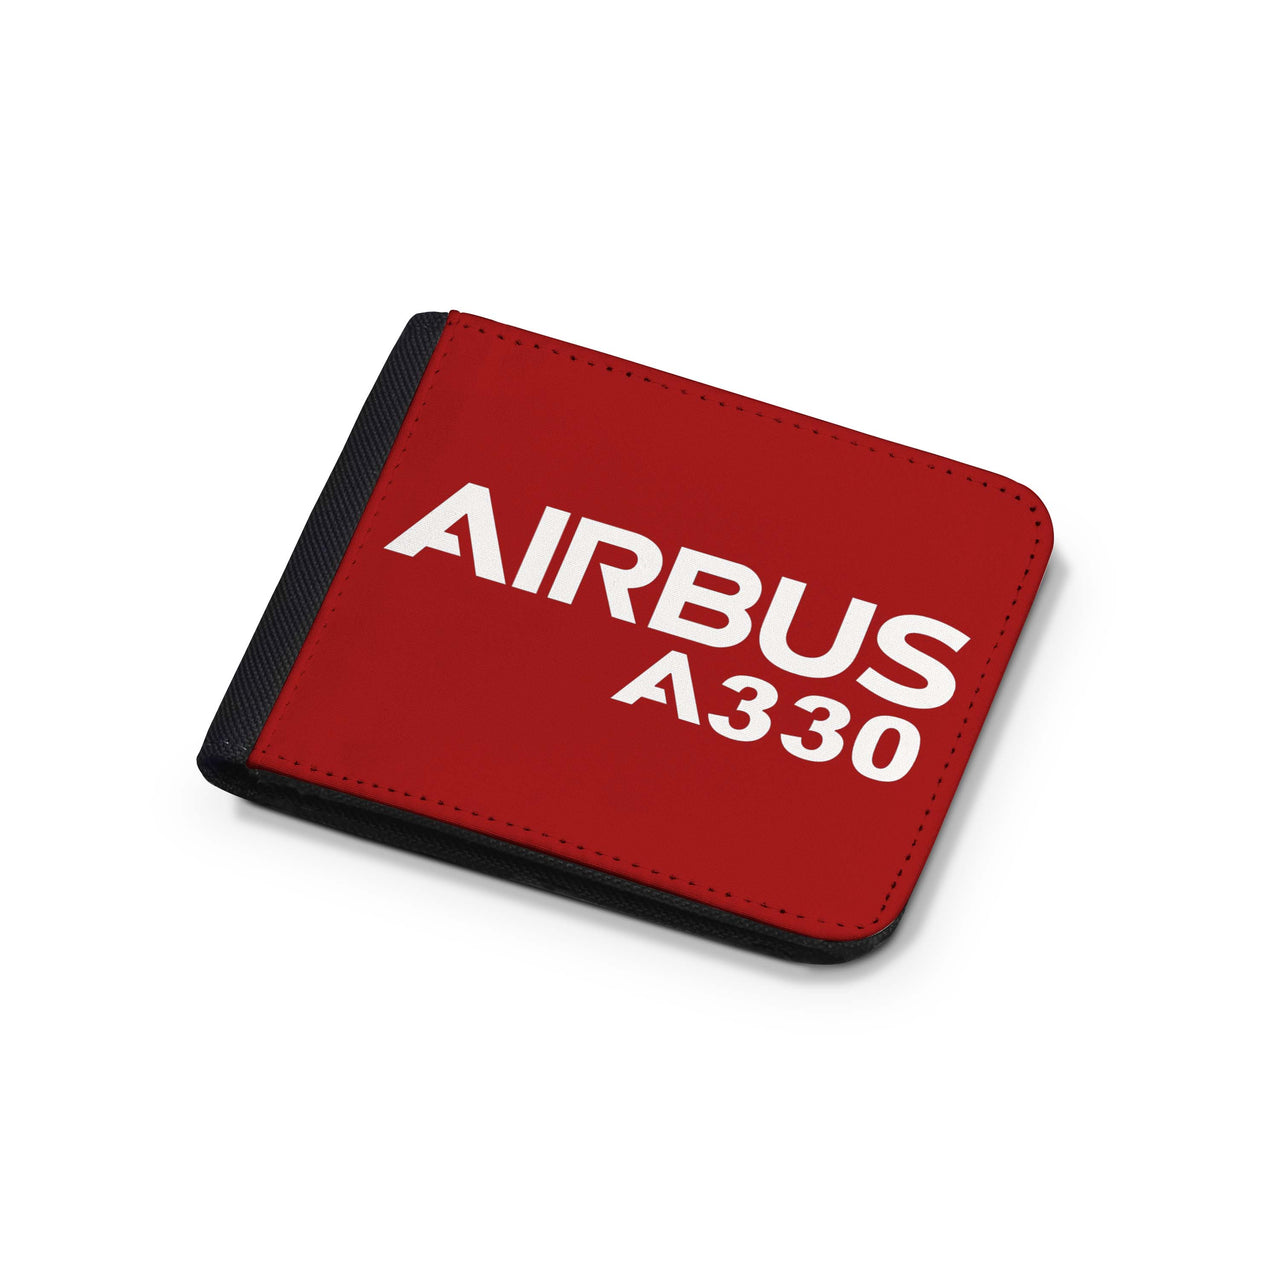 Airbus A330 & Text Designed Wallets